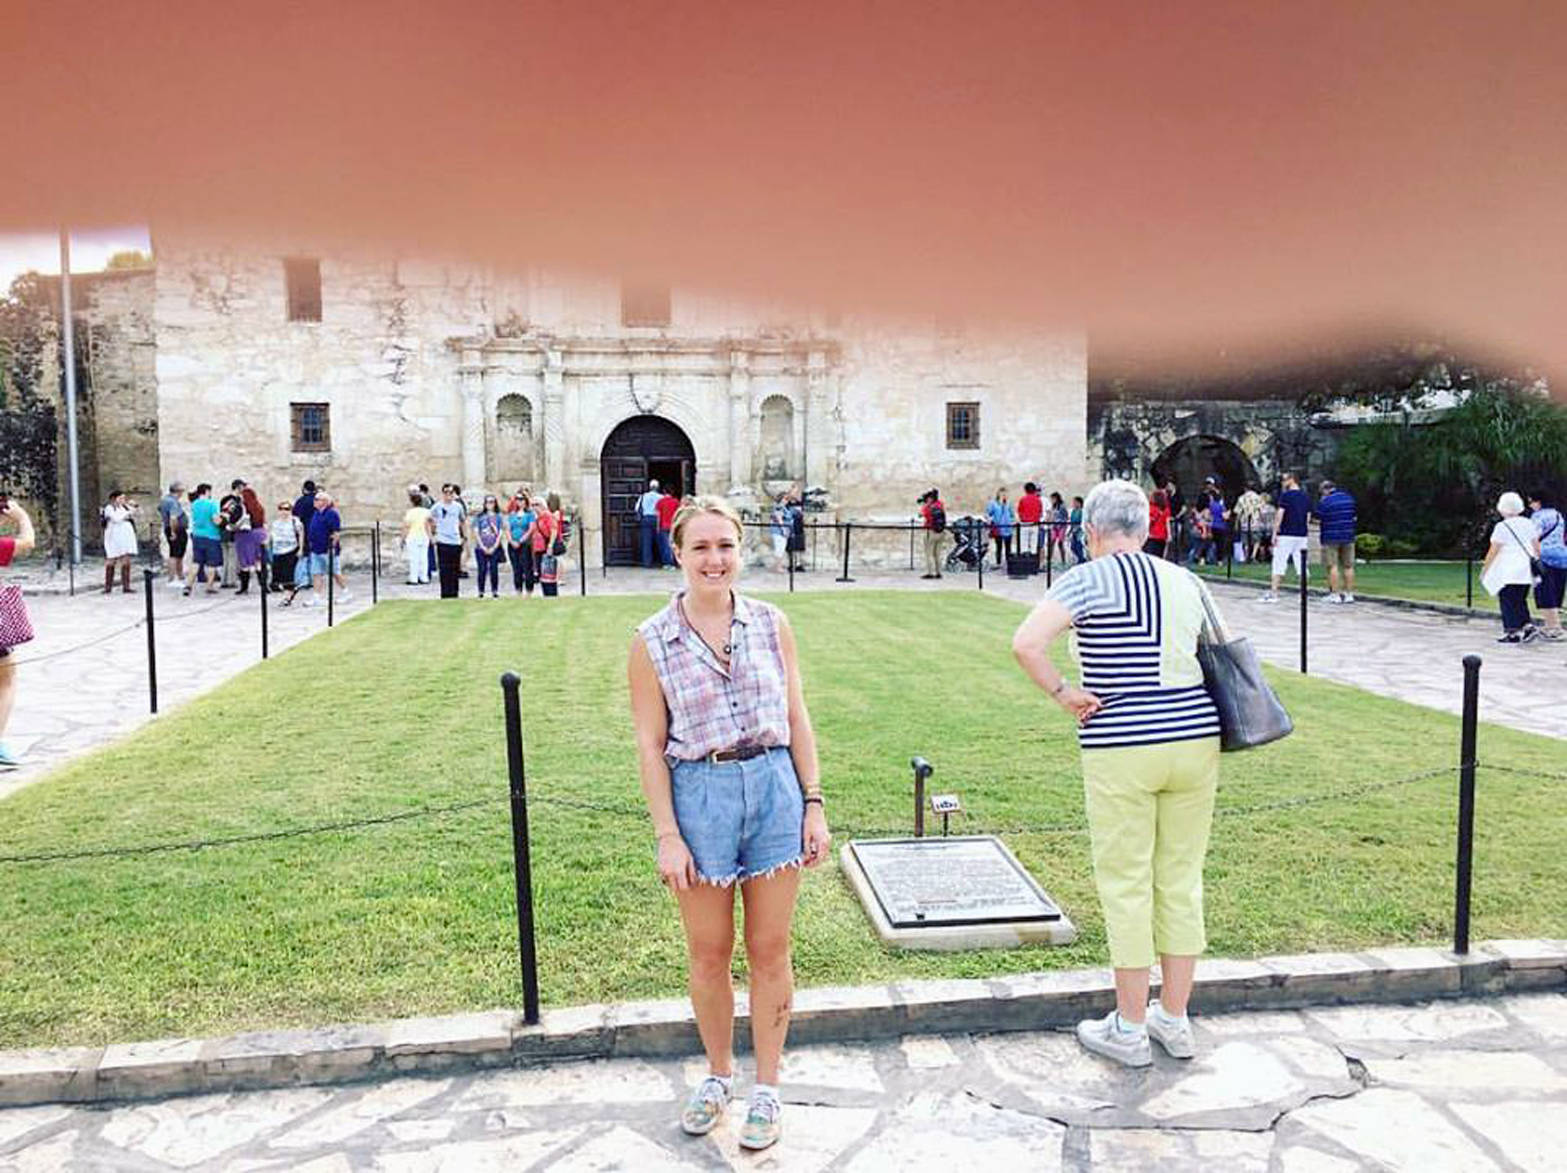 The writer is seen here at the Alamo in October 2016. (Photo provided by Kat Sorensen)